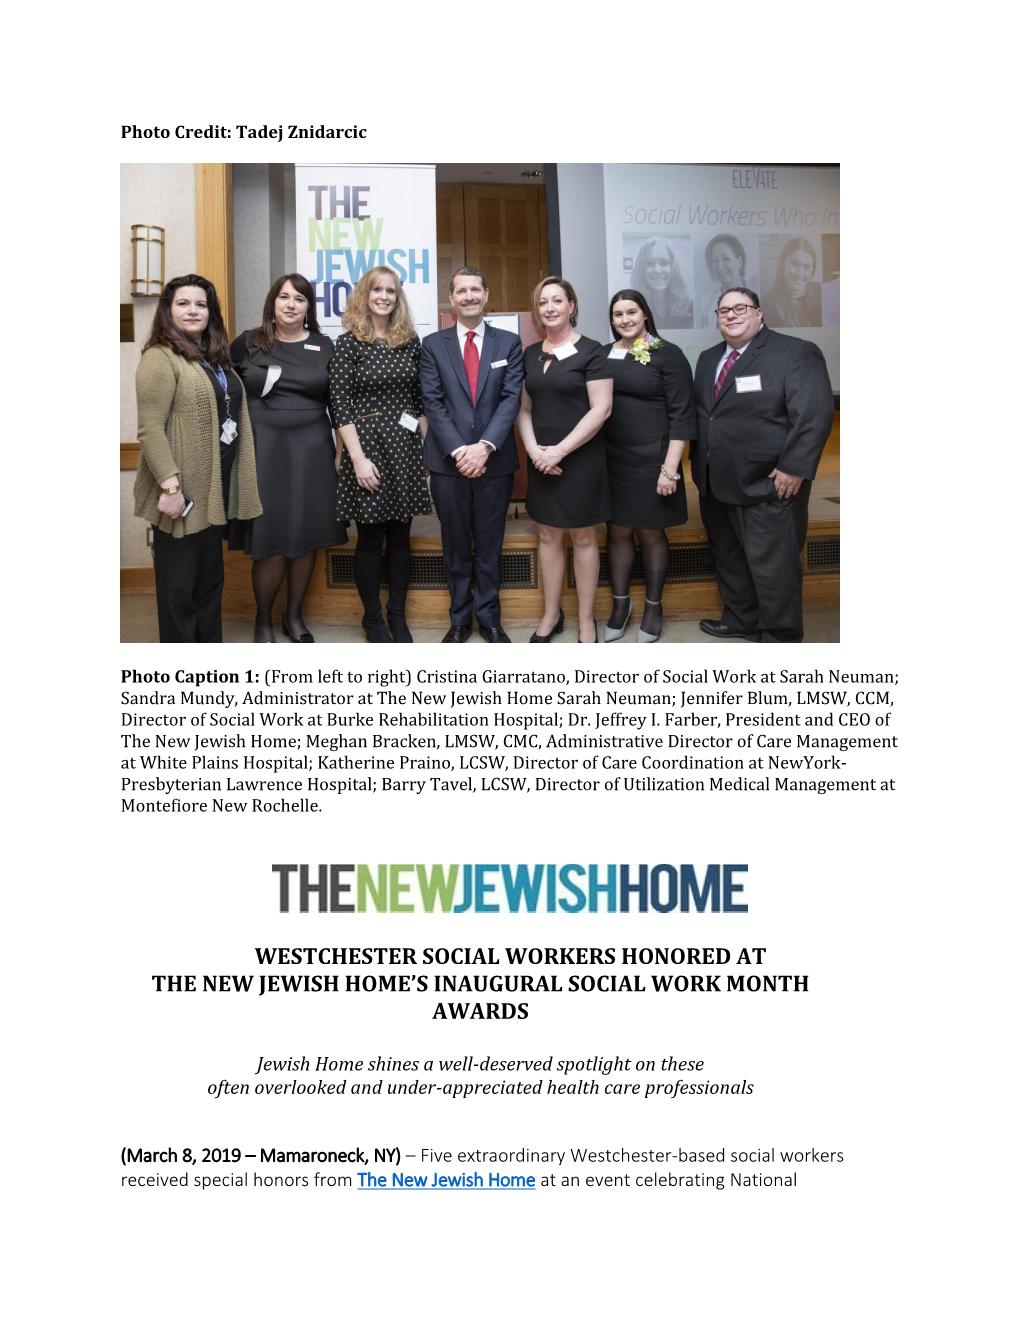 Westchester Social Workers Honored at the New Jewish Home’S Inaugural Social Work Month Awards